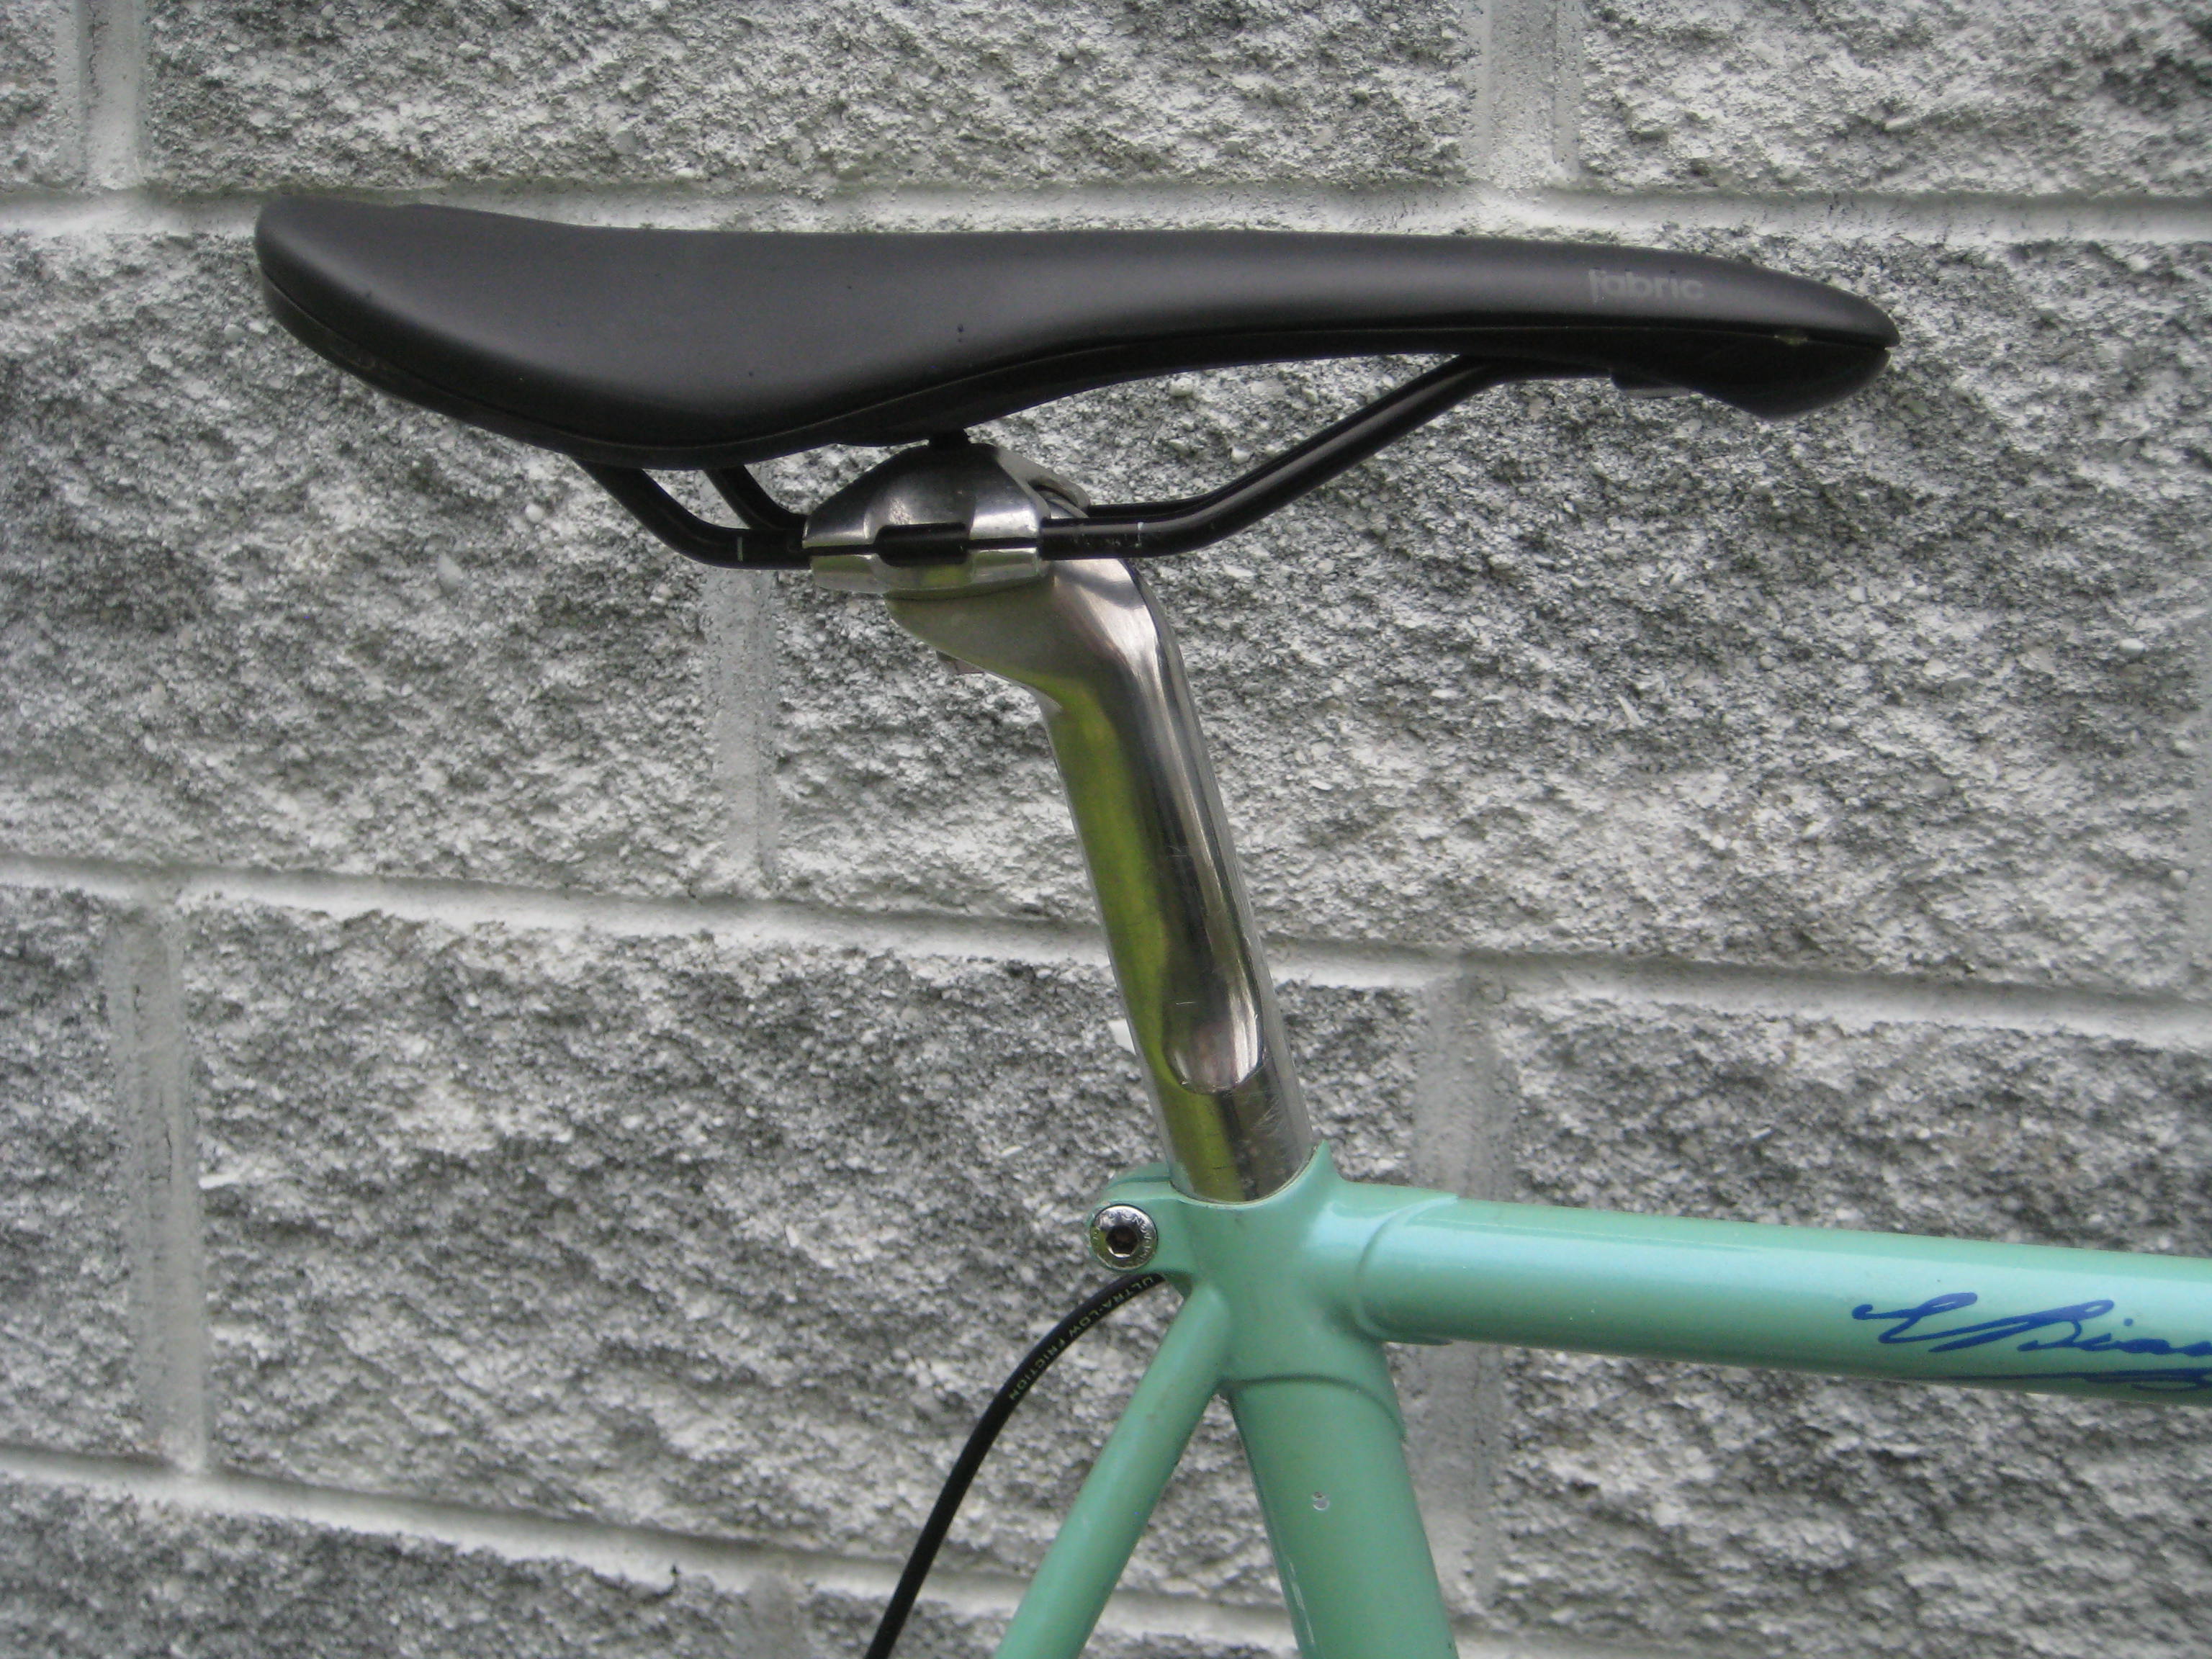 Retro Bicycle Accessories - Vintage Bicycle Clothing & Parts